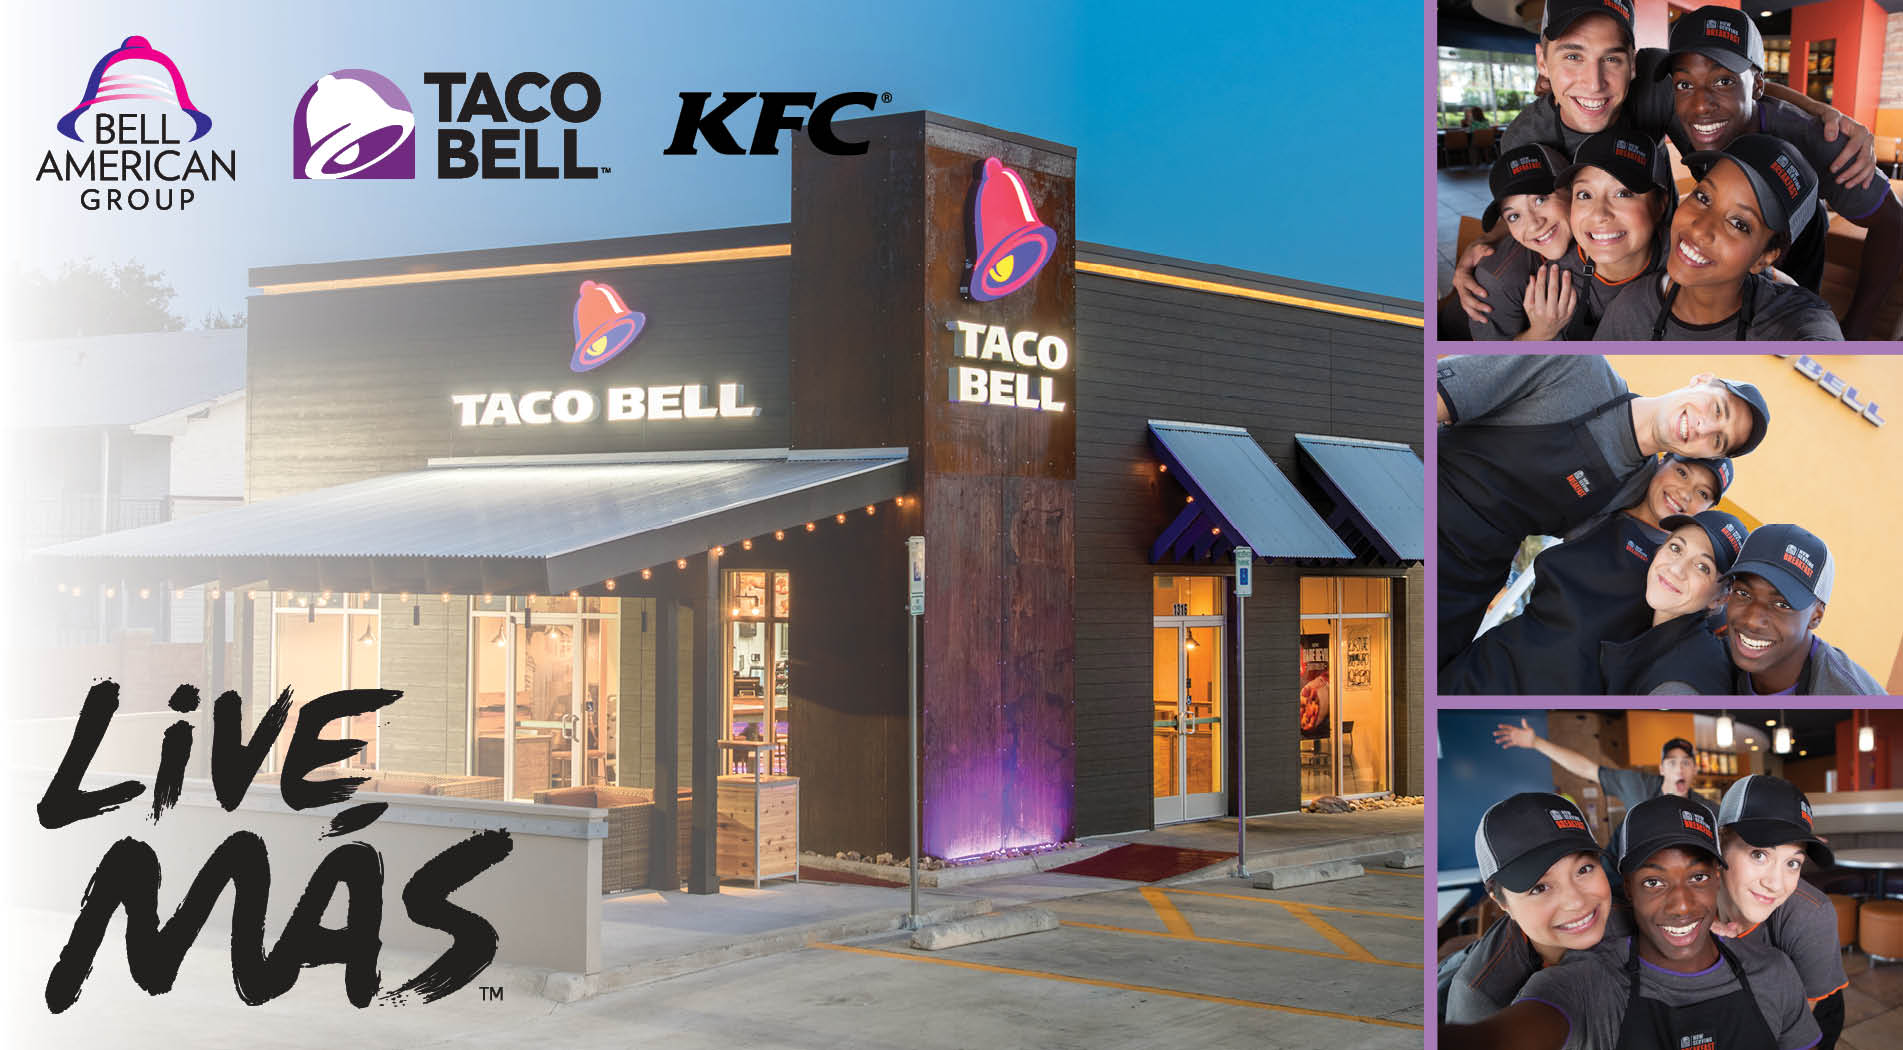 Taco Bell Careers | Bell American Group